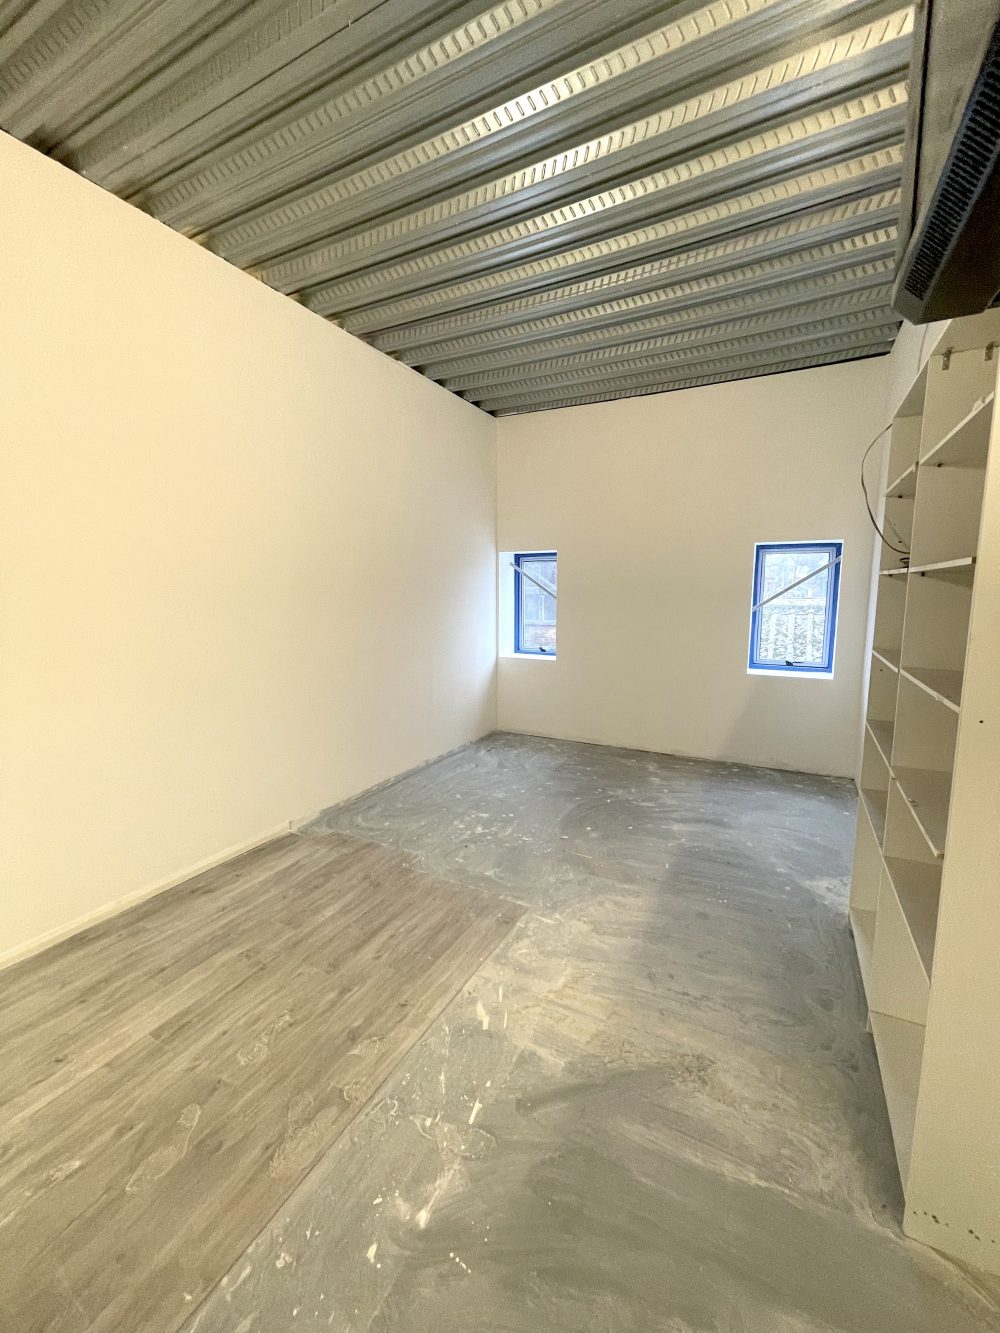 First floor office space : light idustrial creative artist studio to rent in E18 S South Woodford Pic 13